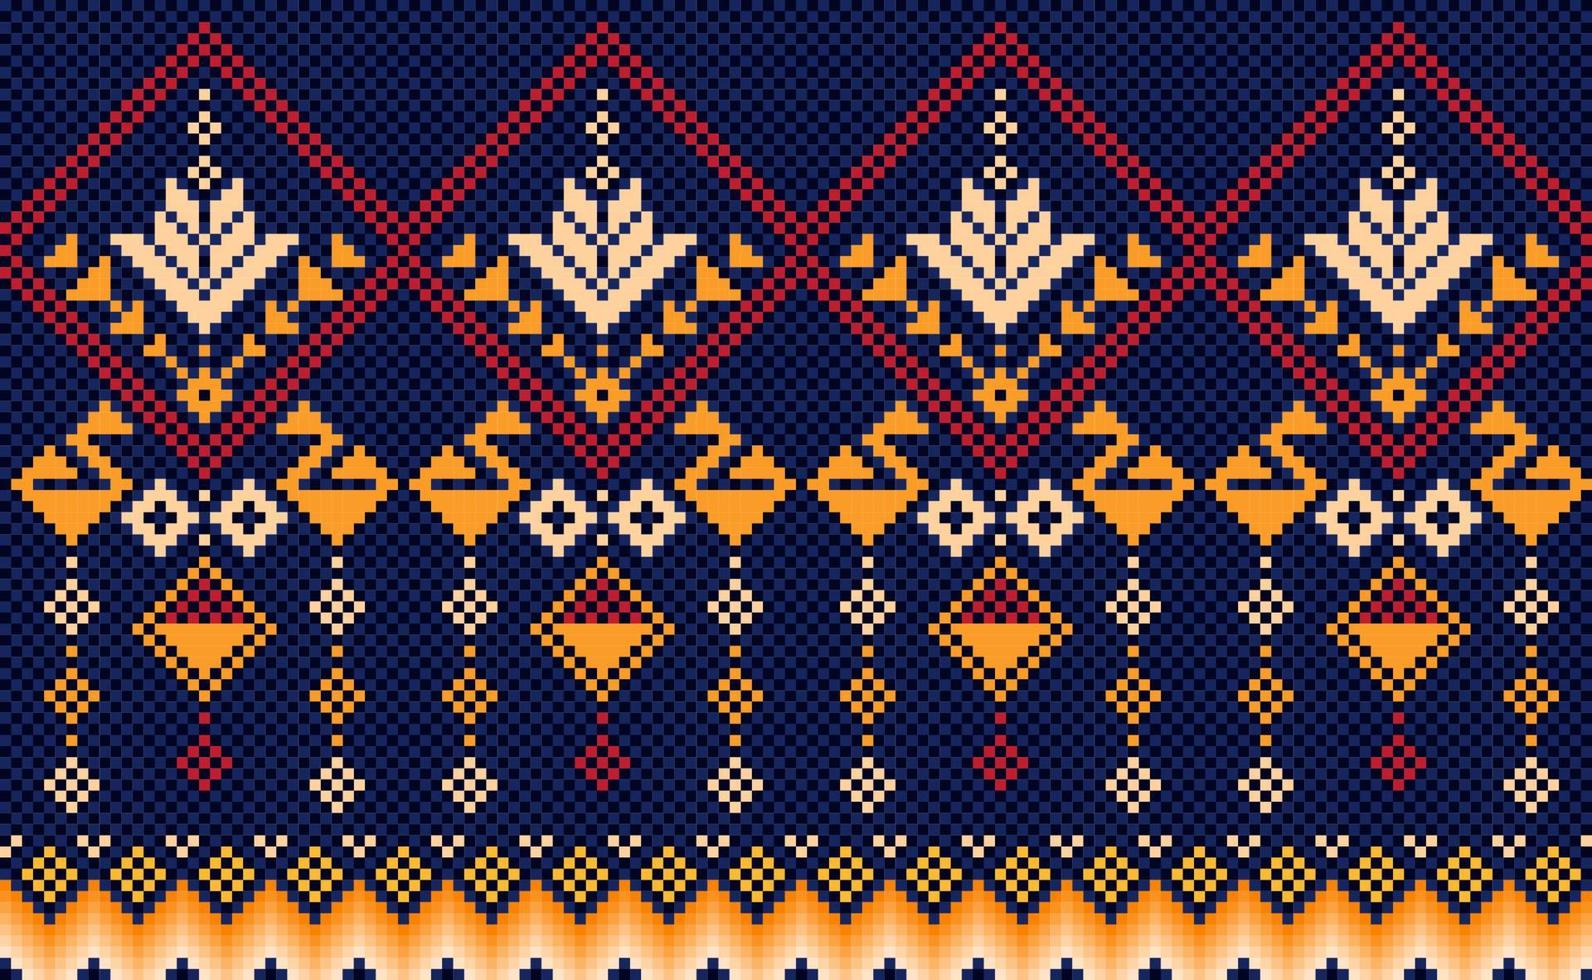 Geometric ethnic pattern, Vector embroidery ethnic background, Orange and red Pixel diagonal ornate style